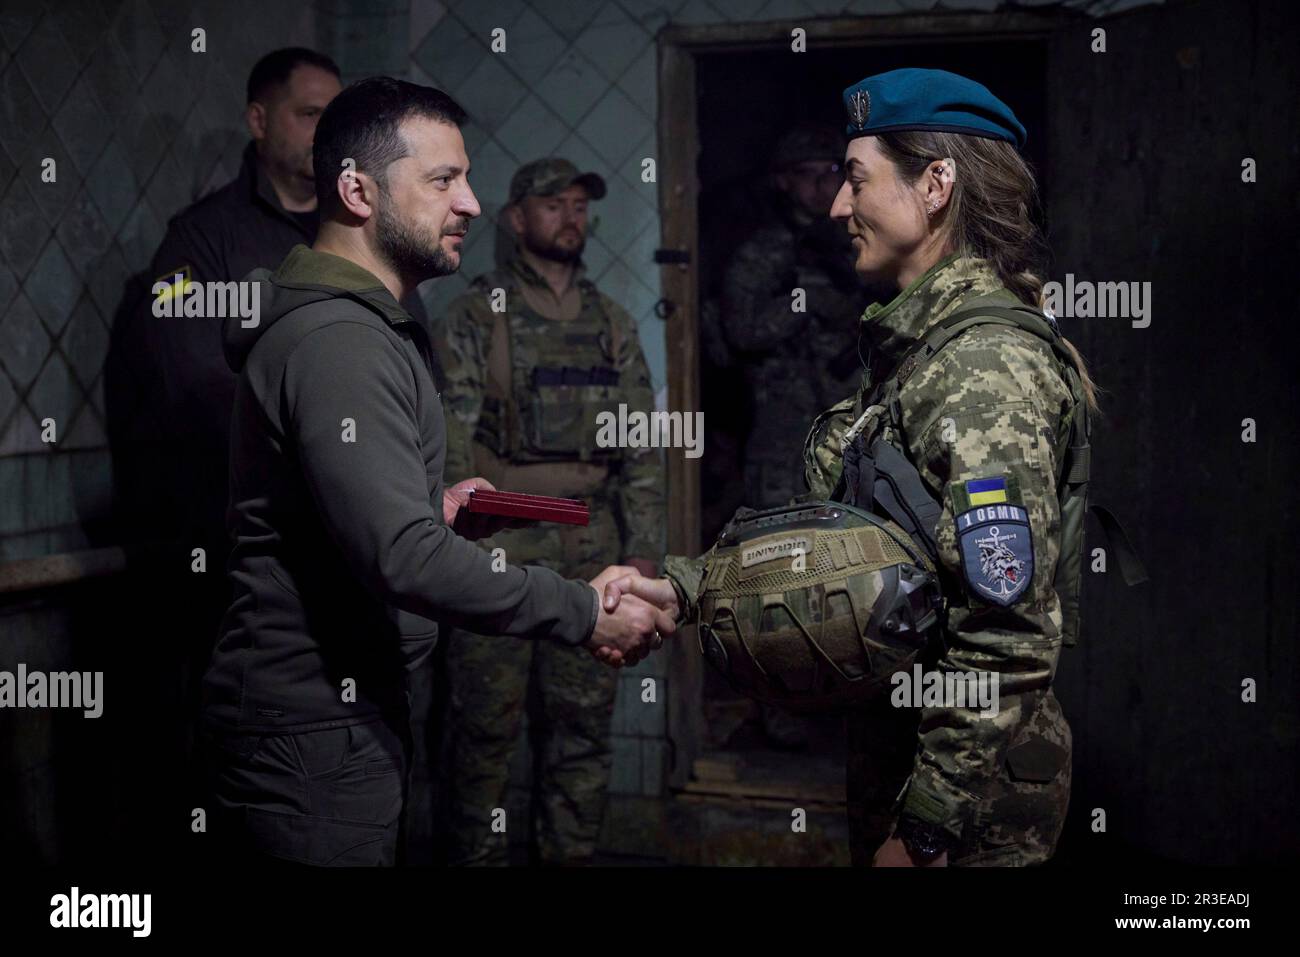 Vuhledar, Ukraine. 23rd May, 2023. Ukrainian President Volodymyr Zelenskyy, left, awards state medals to a female Ukraine Marine during a visit to frontline positions in the Donetsk region, May 23, 2023 in Vuhledar, Donetsk Oblast, Ukraine. Zelenskyy visited the troops to celebrate the Day of the Marines. Credit: Pool Photo/Ukrainian Presidential Press Office/Alamy Live News Stock Photo